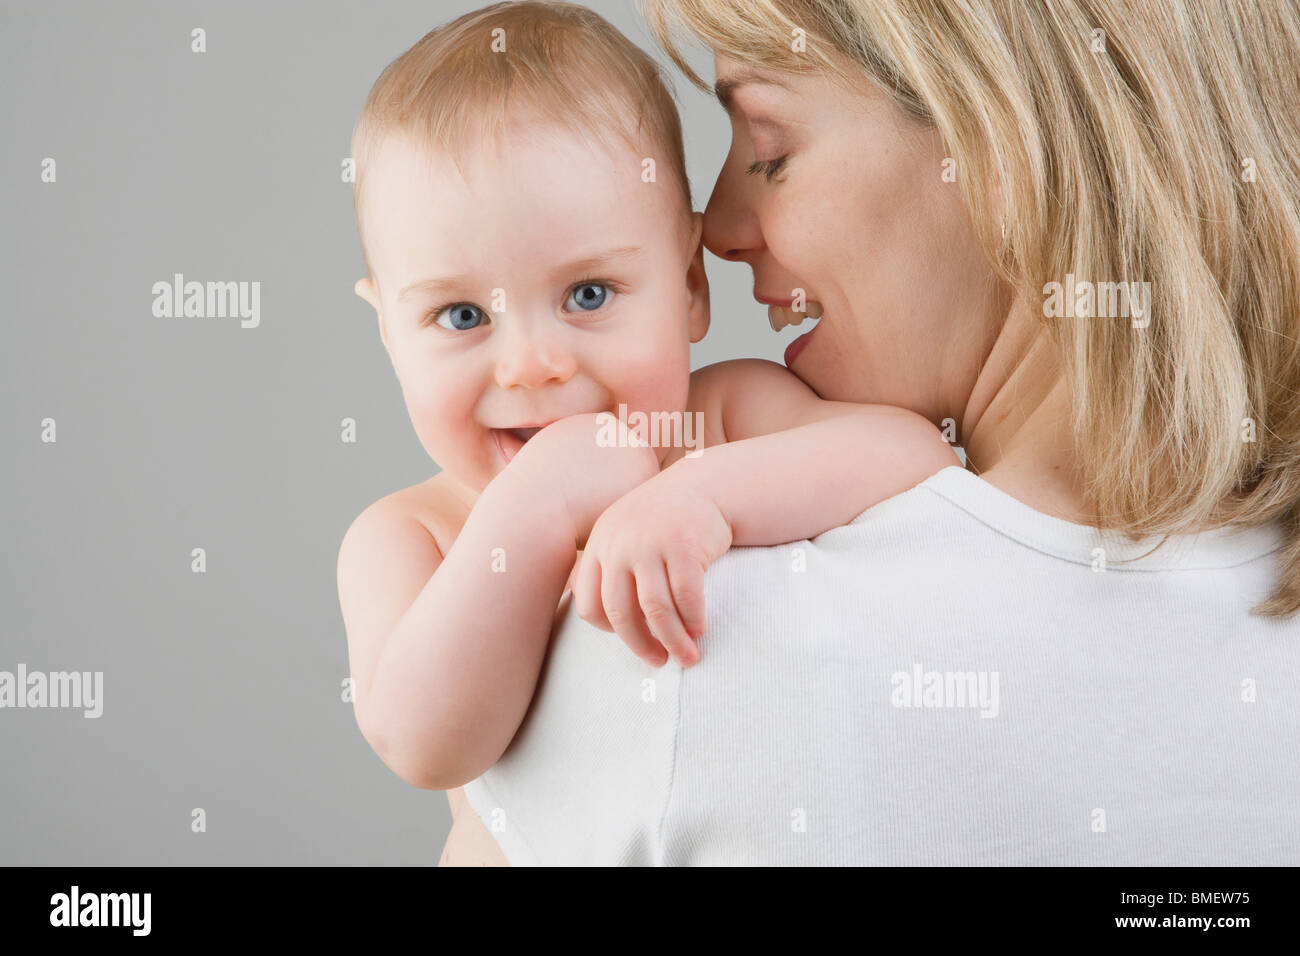 A Toddler Boy And His Mother Stock Photo